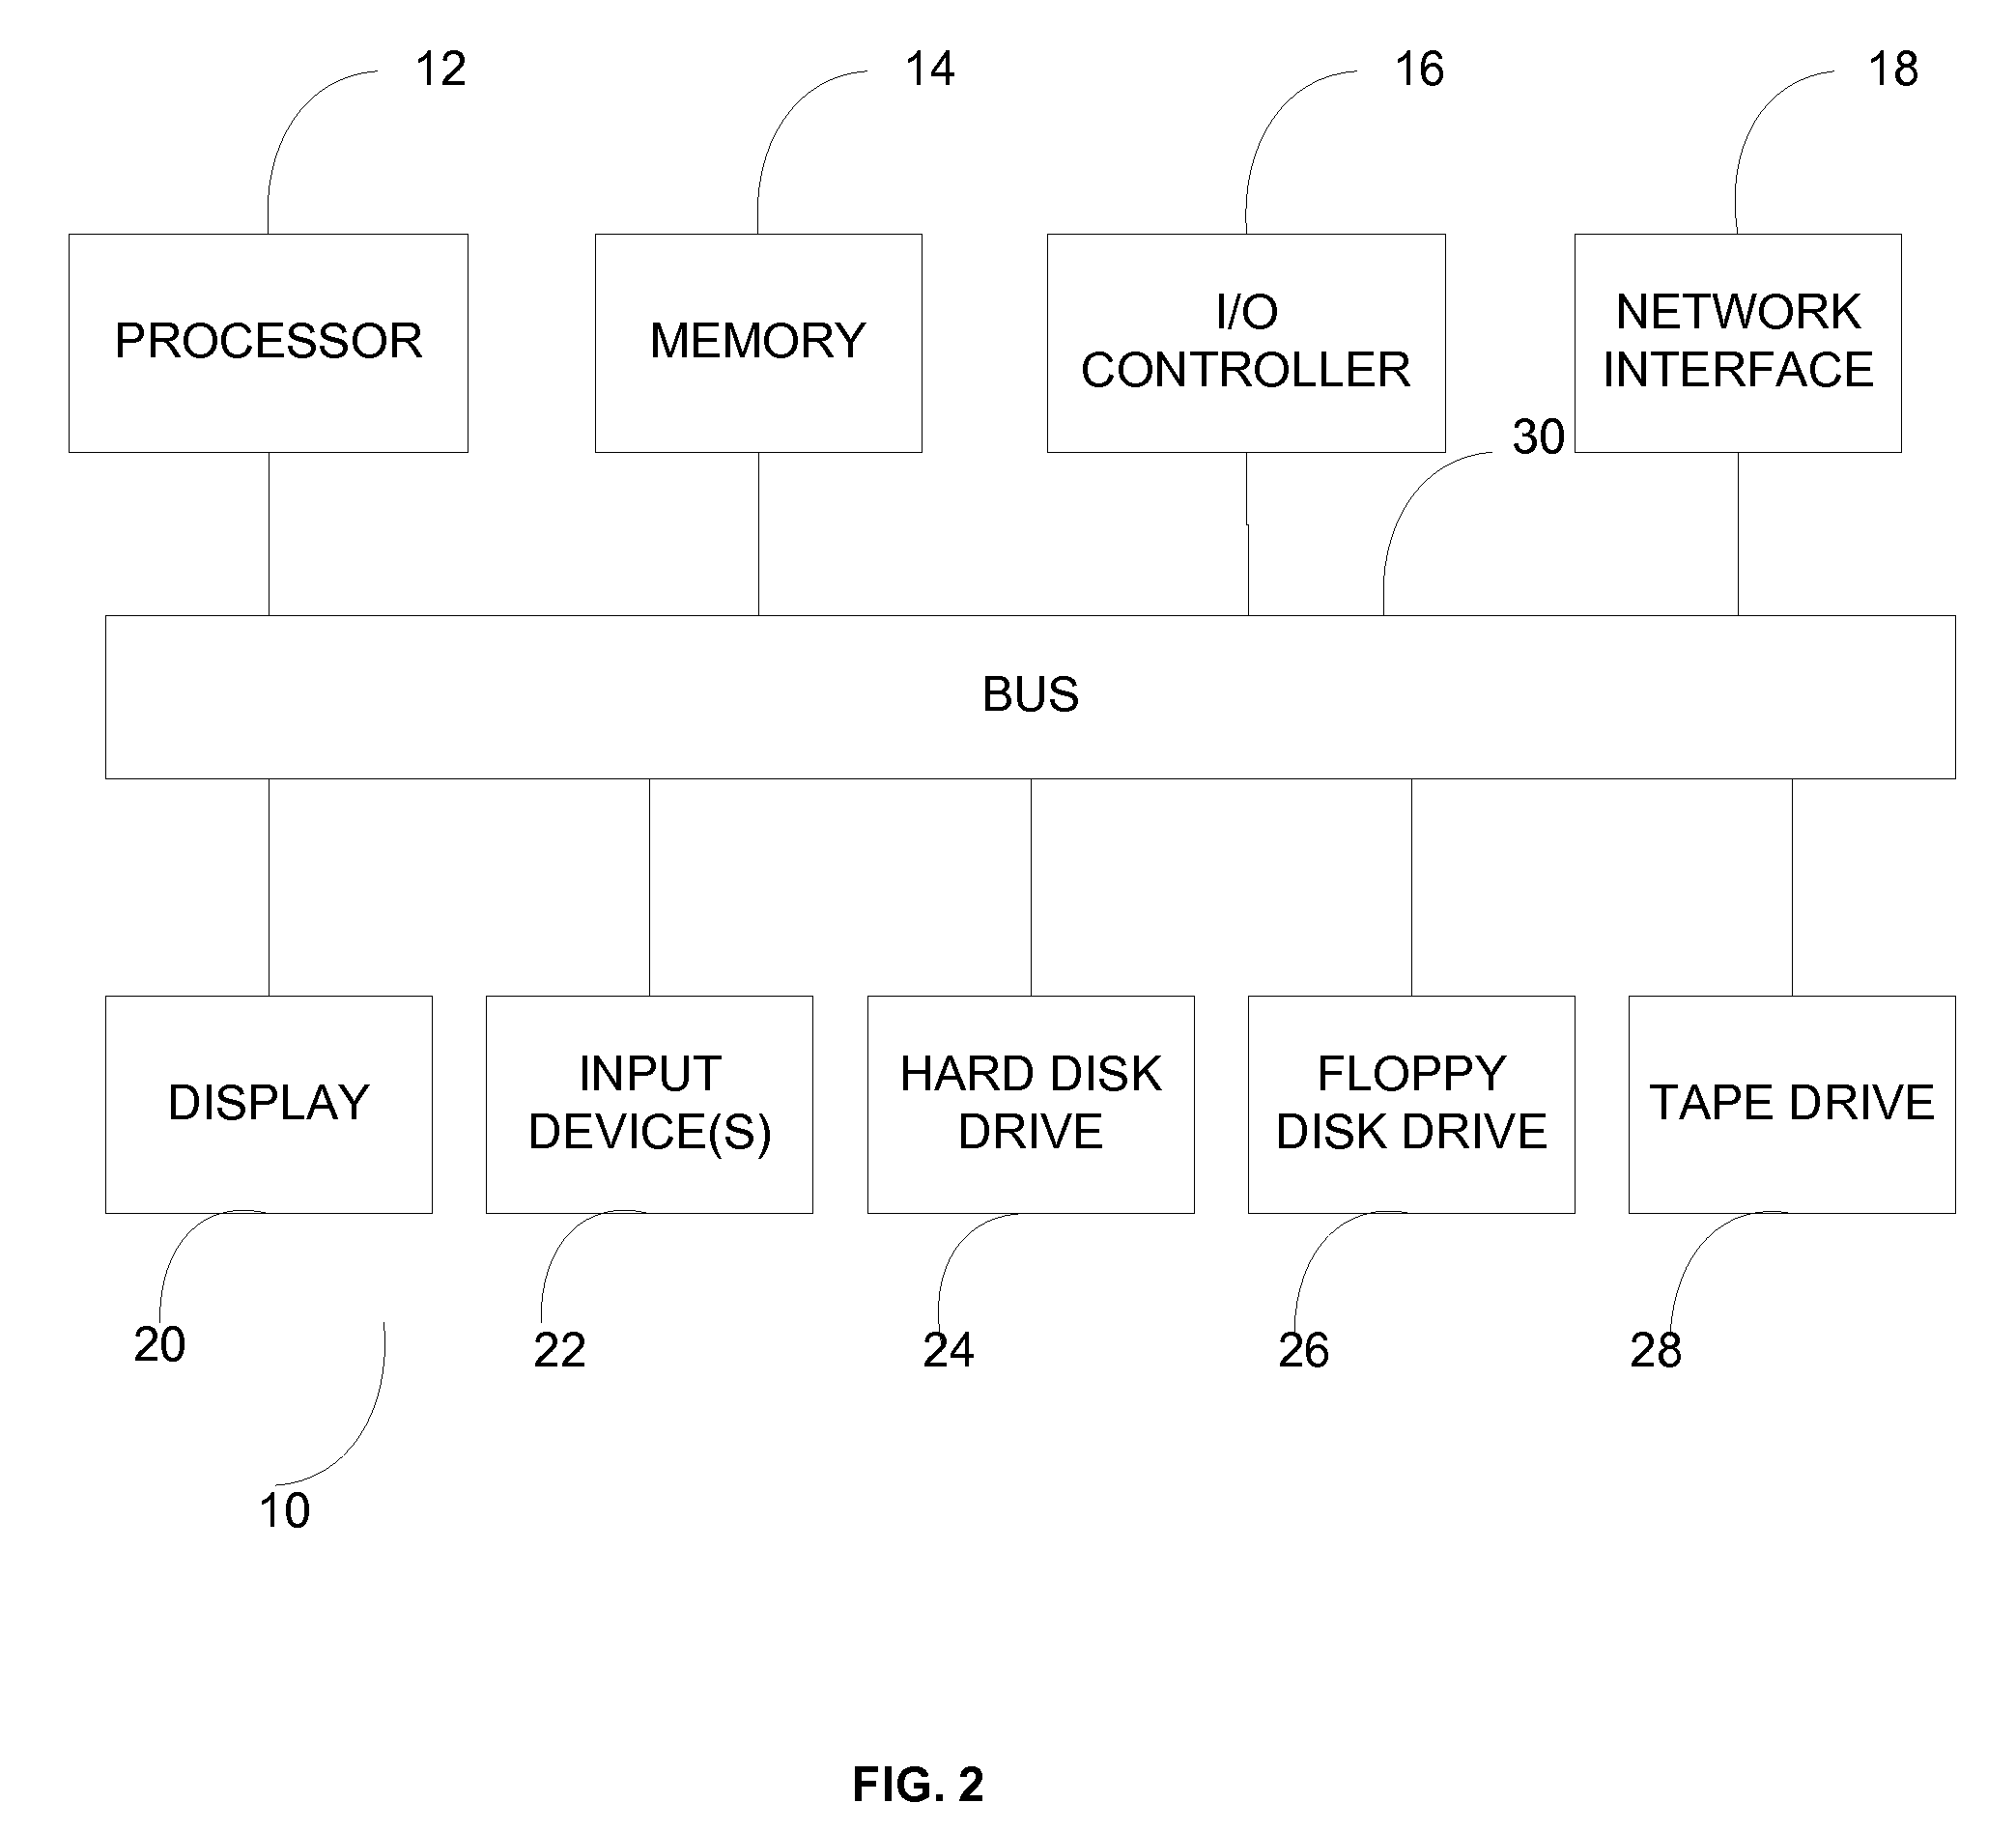 Systems and Methods for Recognition of Individuals Using Multiple Biometric Searches